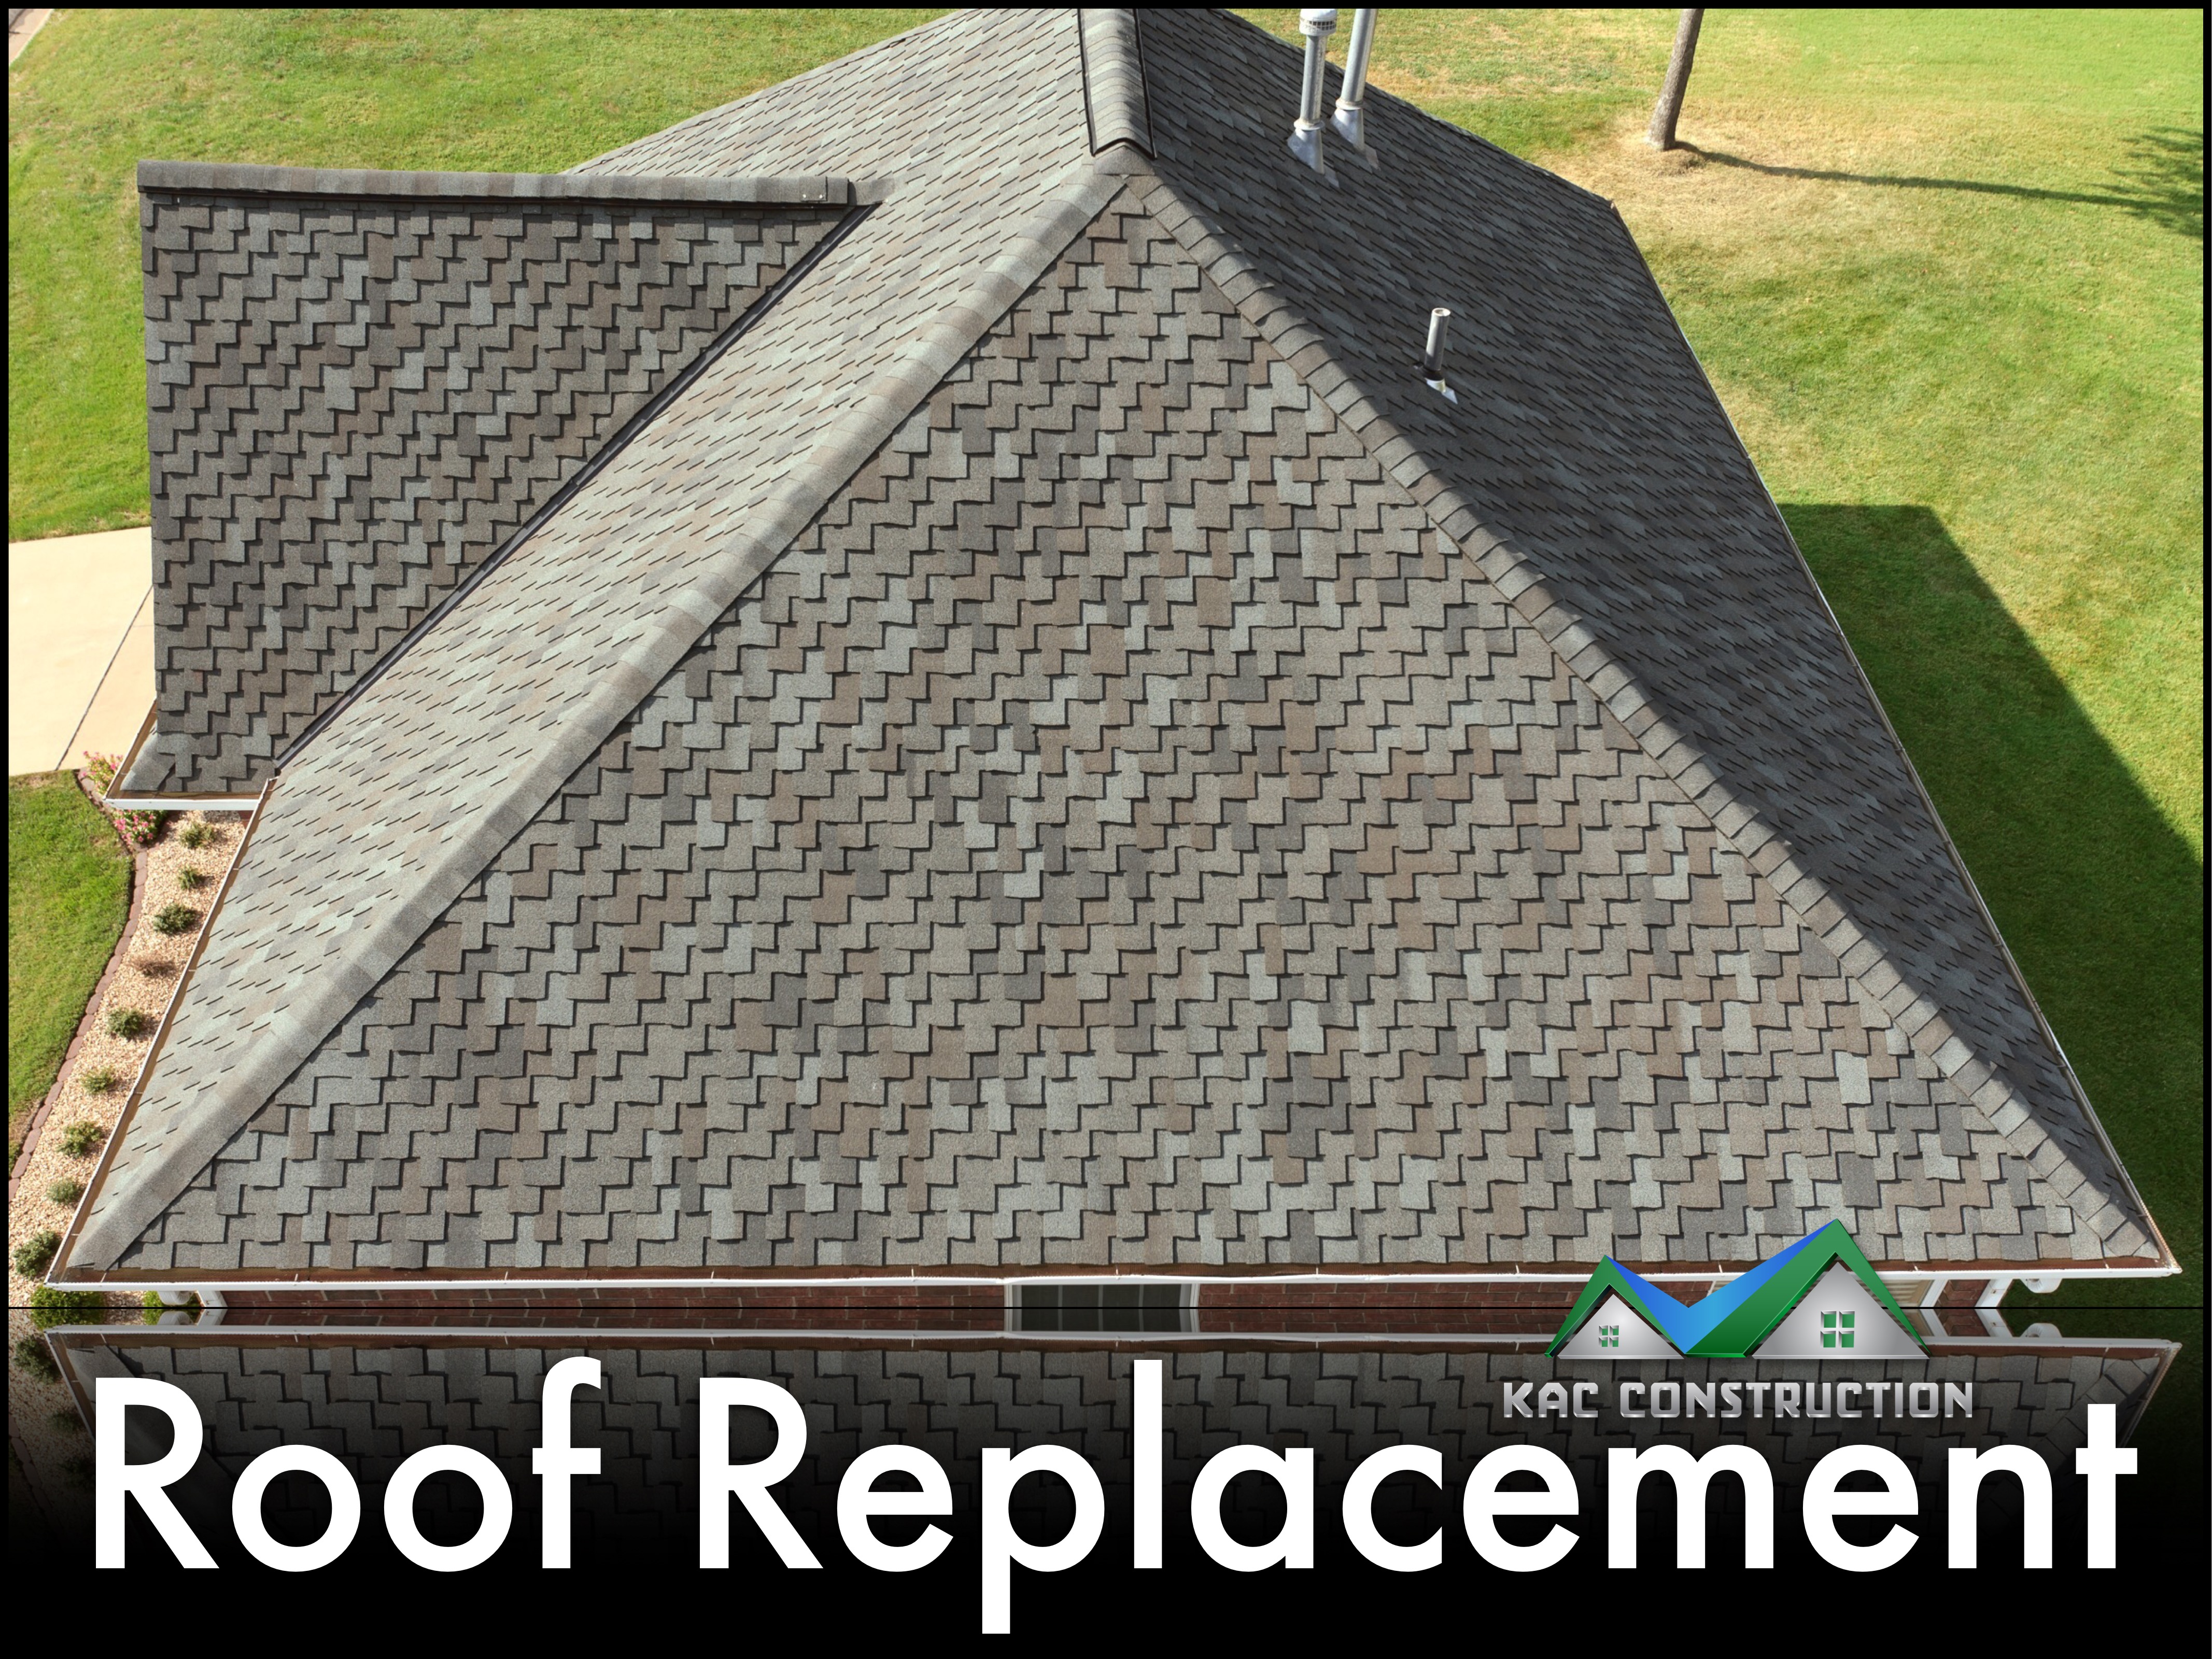 residential roofing, residential roofing company, residential roofing company ri, roofing company ri, roofing company in ri